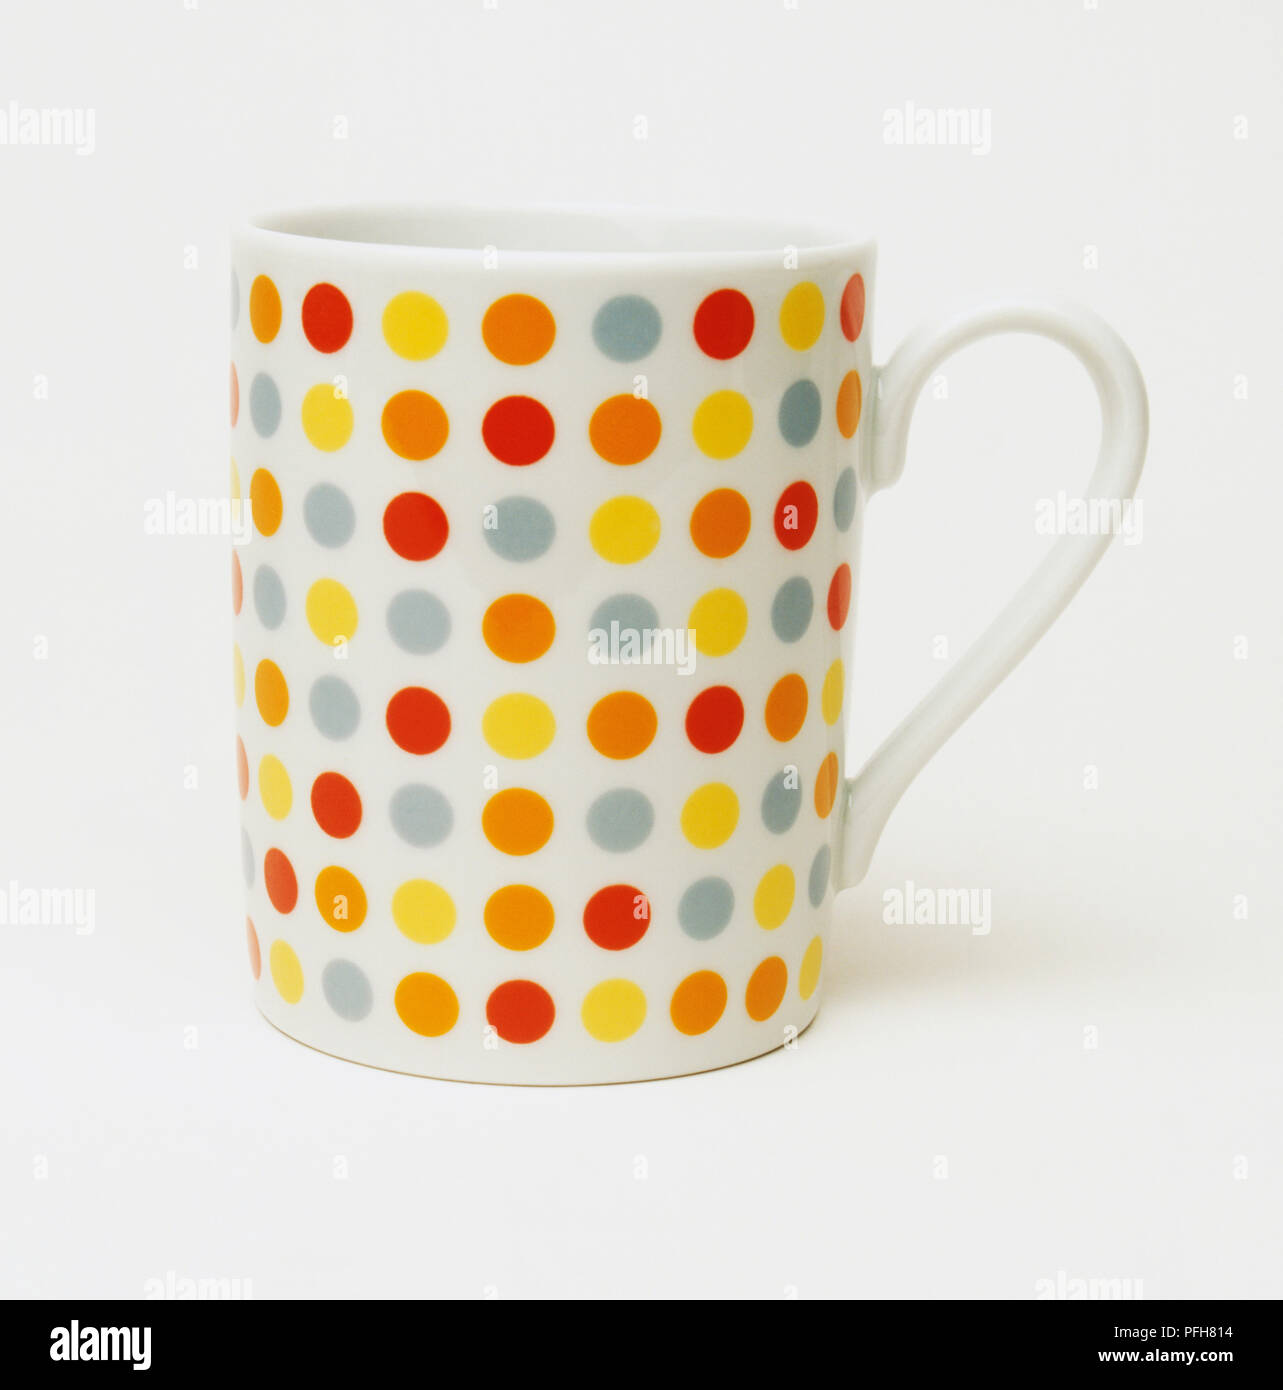 A mug showing design of colourful dots Stock Photo